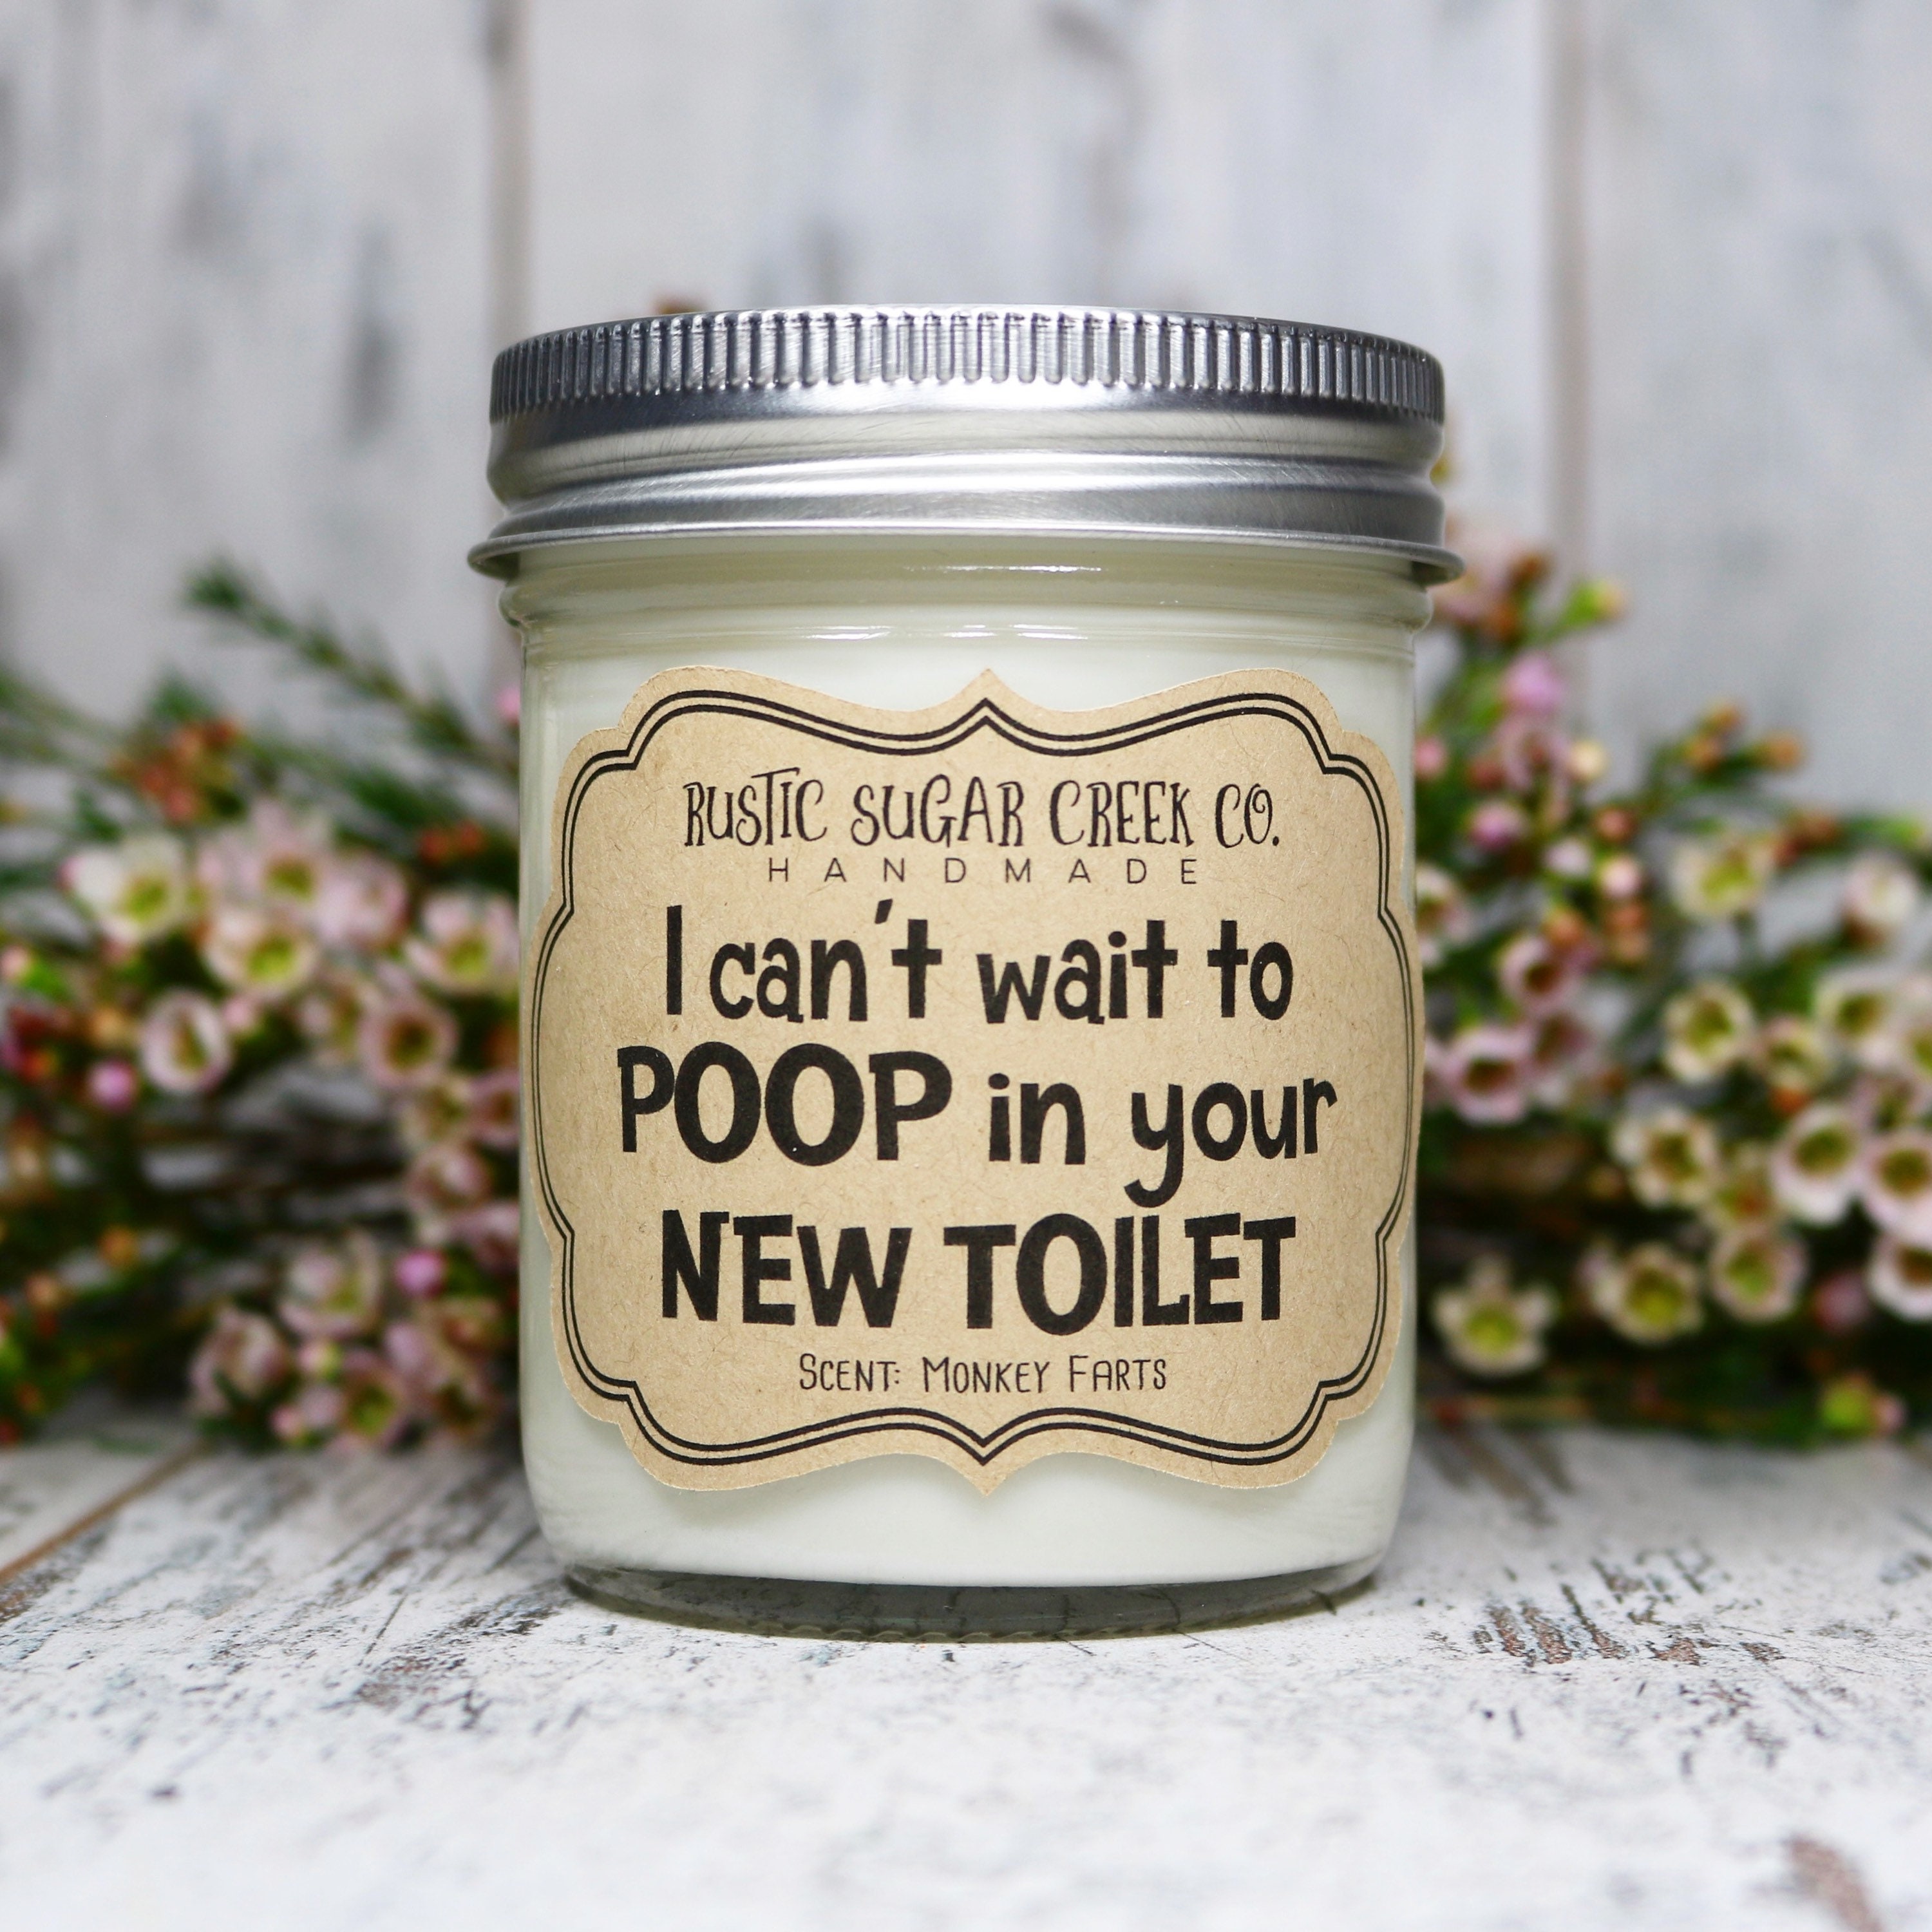 House Warming Gifts New Homeowner Gifts Funny Housewarming Gifts New Home I Can't Wait to Poop in Your New Toilet Candles- Home Warming Gifts New Home Candle New Apartment Gifts Jasmine, 10oz